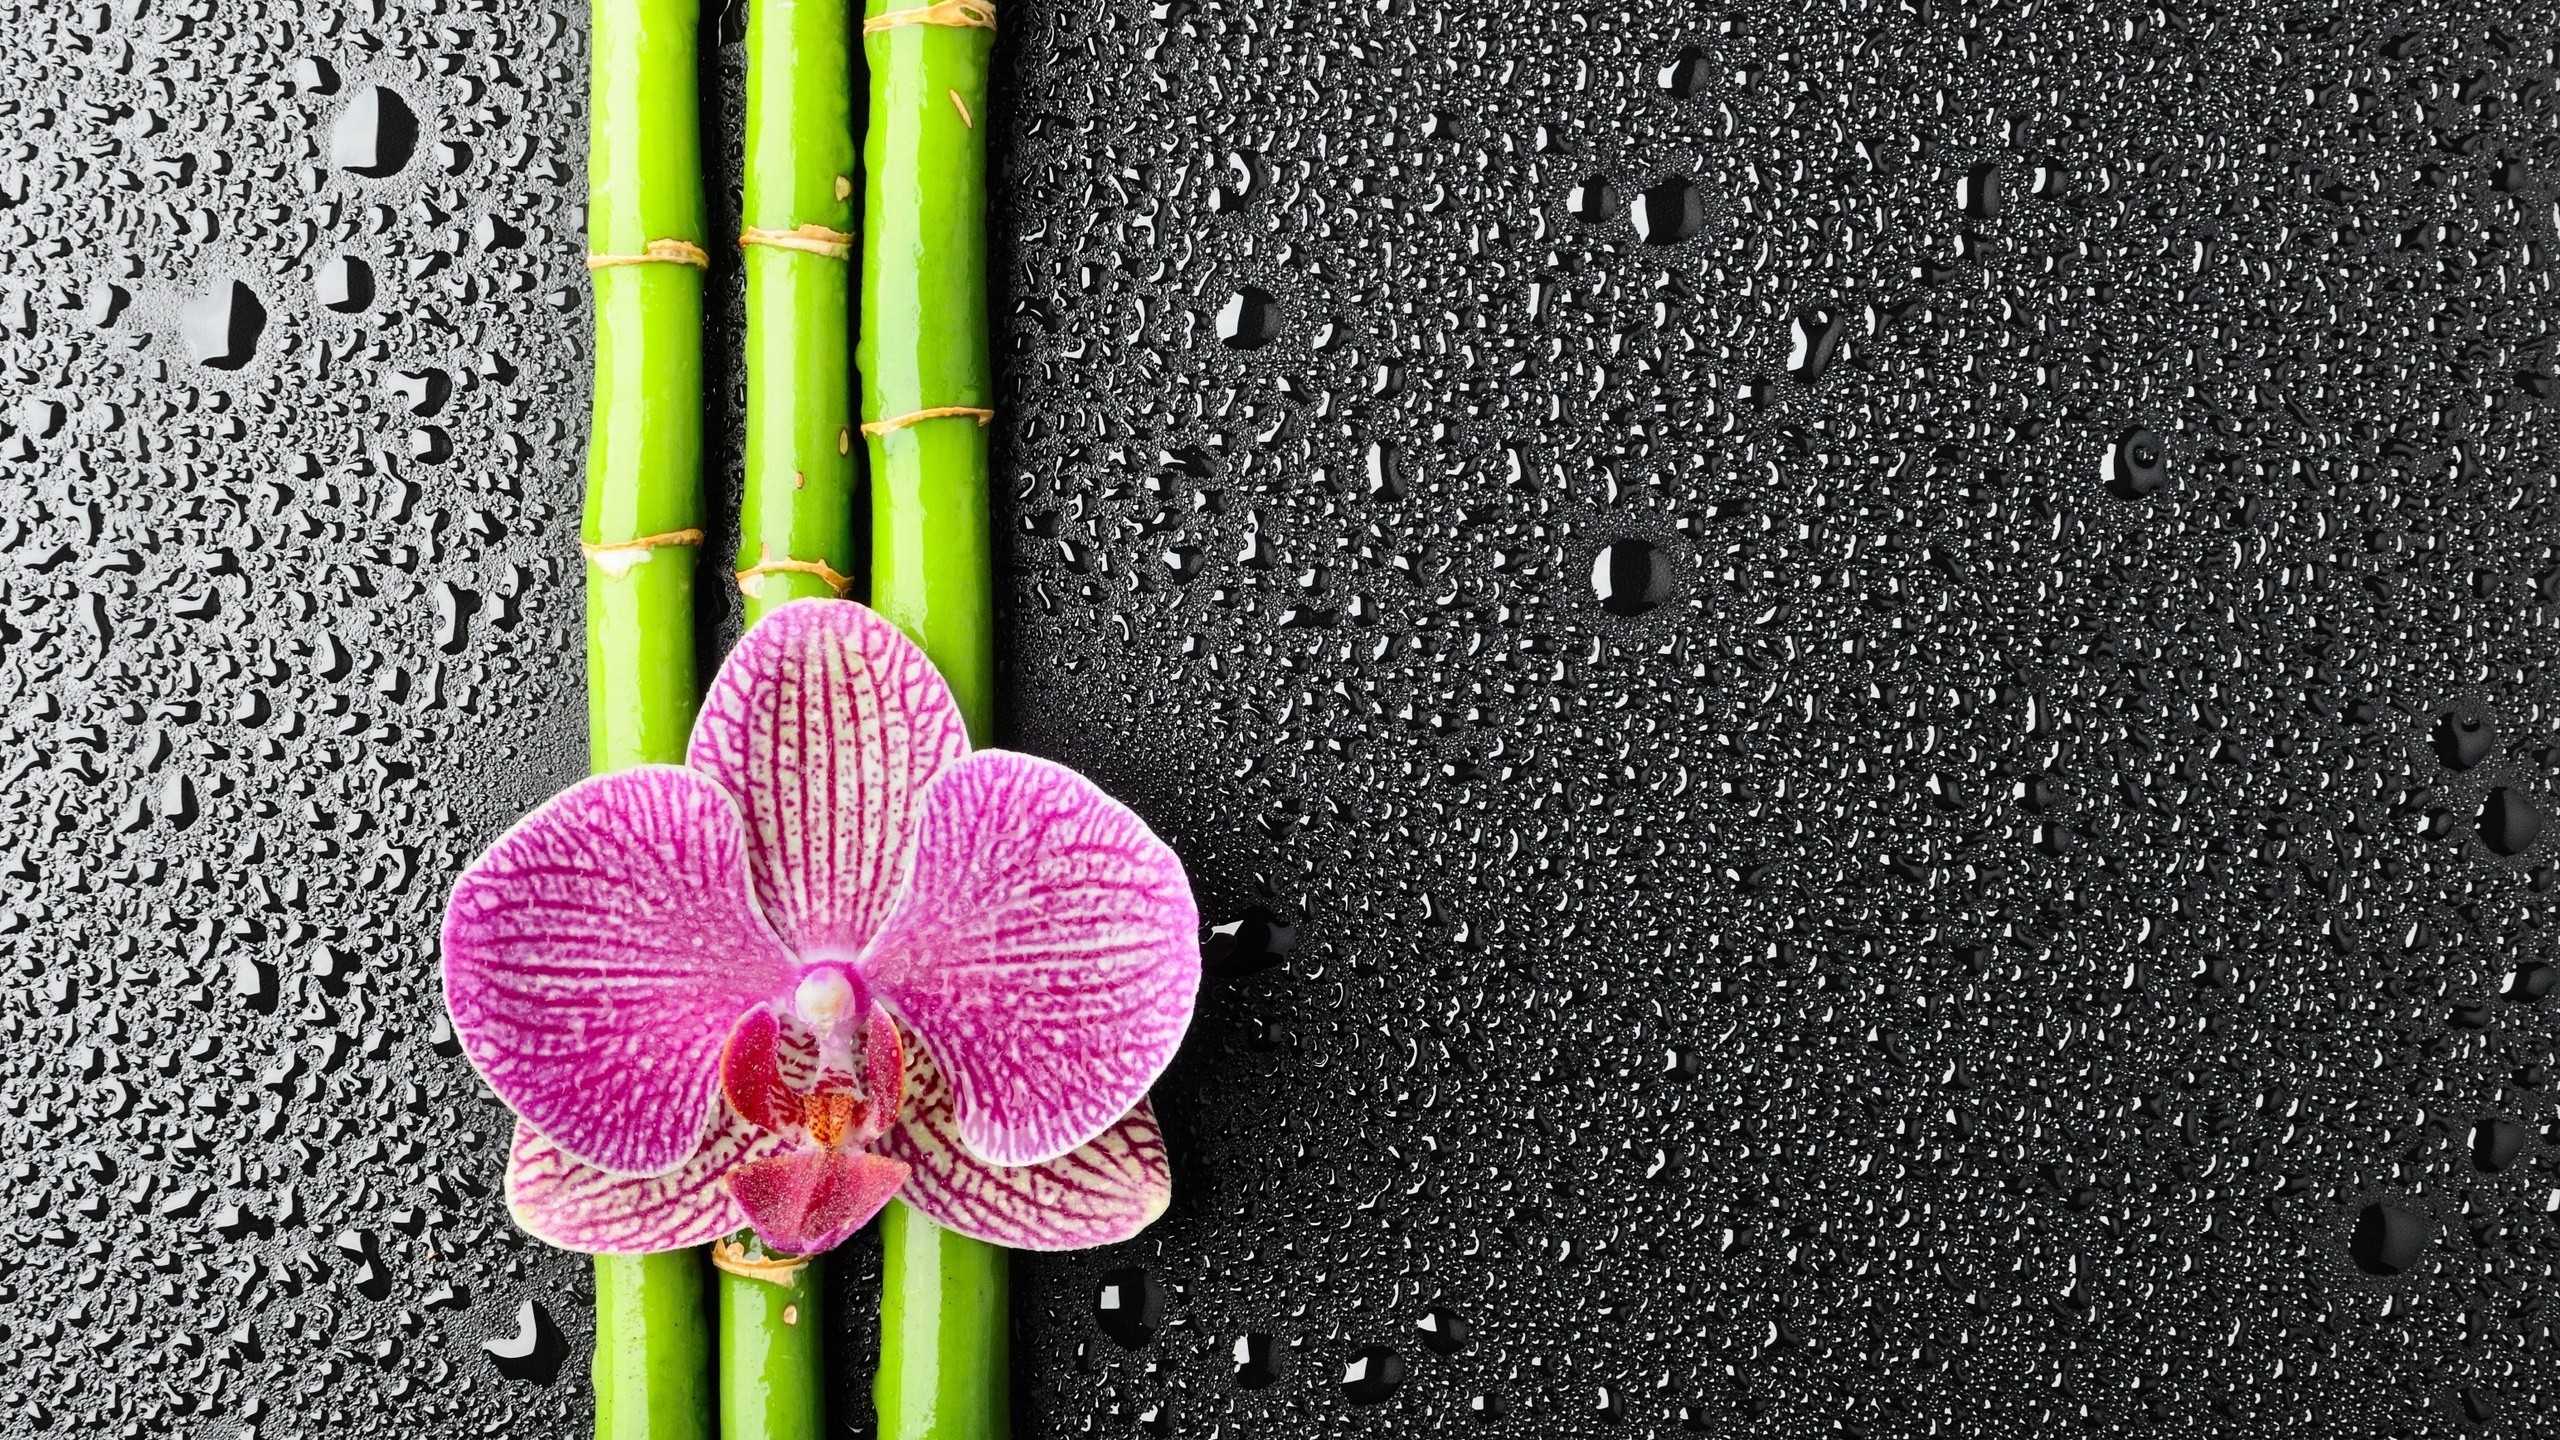 General 2560x1440 flowers water drops bamboo orchids plants texture simple background closeup